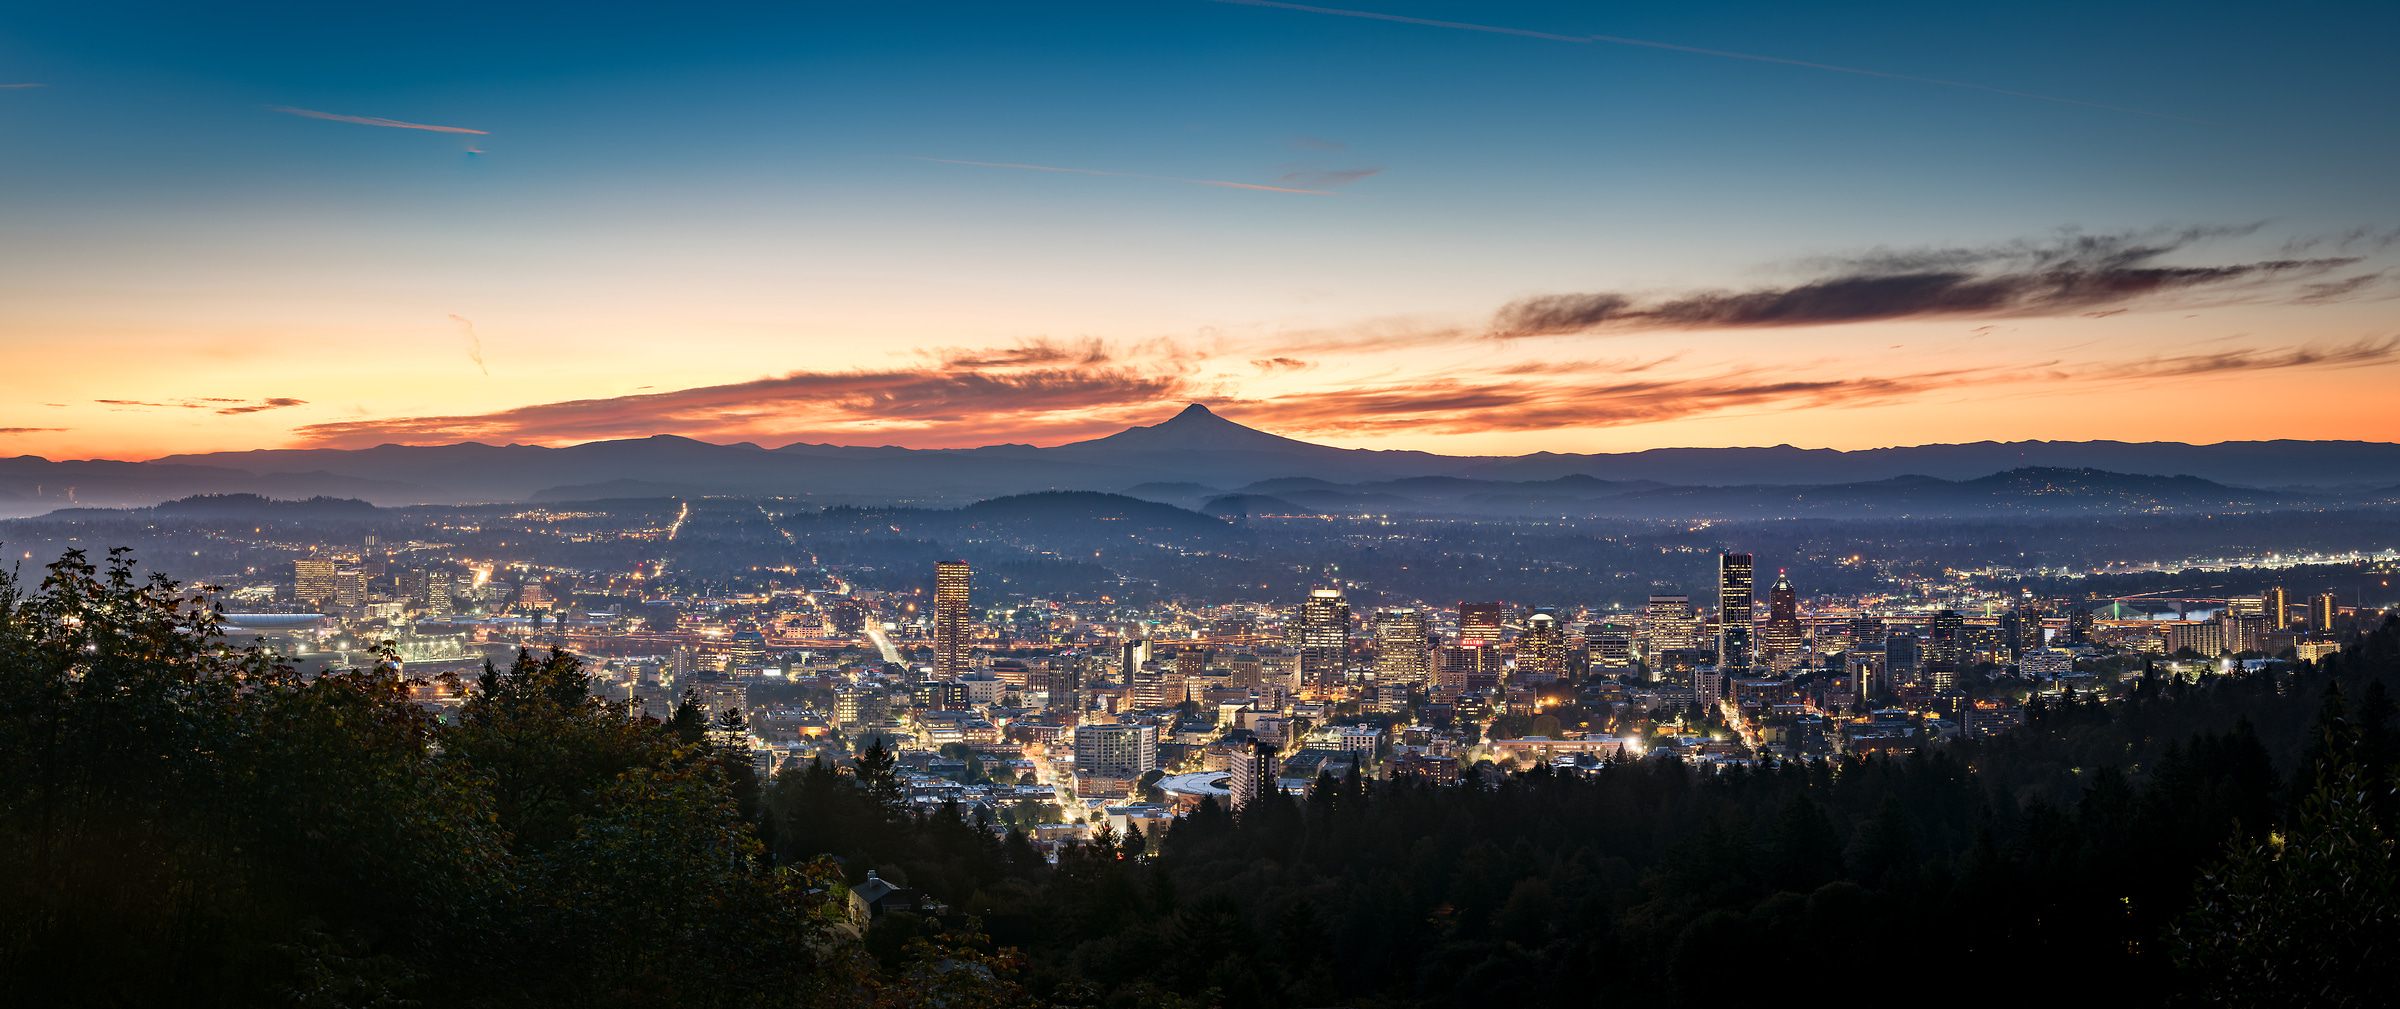 197 megapixels! A very high resolution, large-format VAST photo print of the Portland skyline; cityscape photograph created by Justin Katz in Portland, Oregon